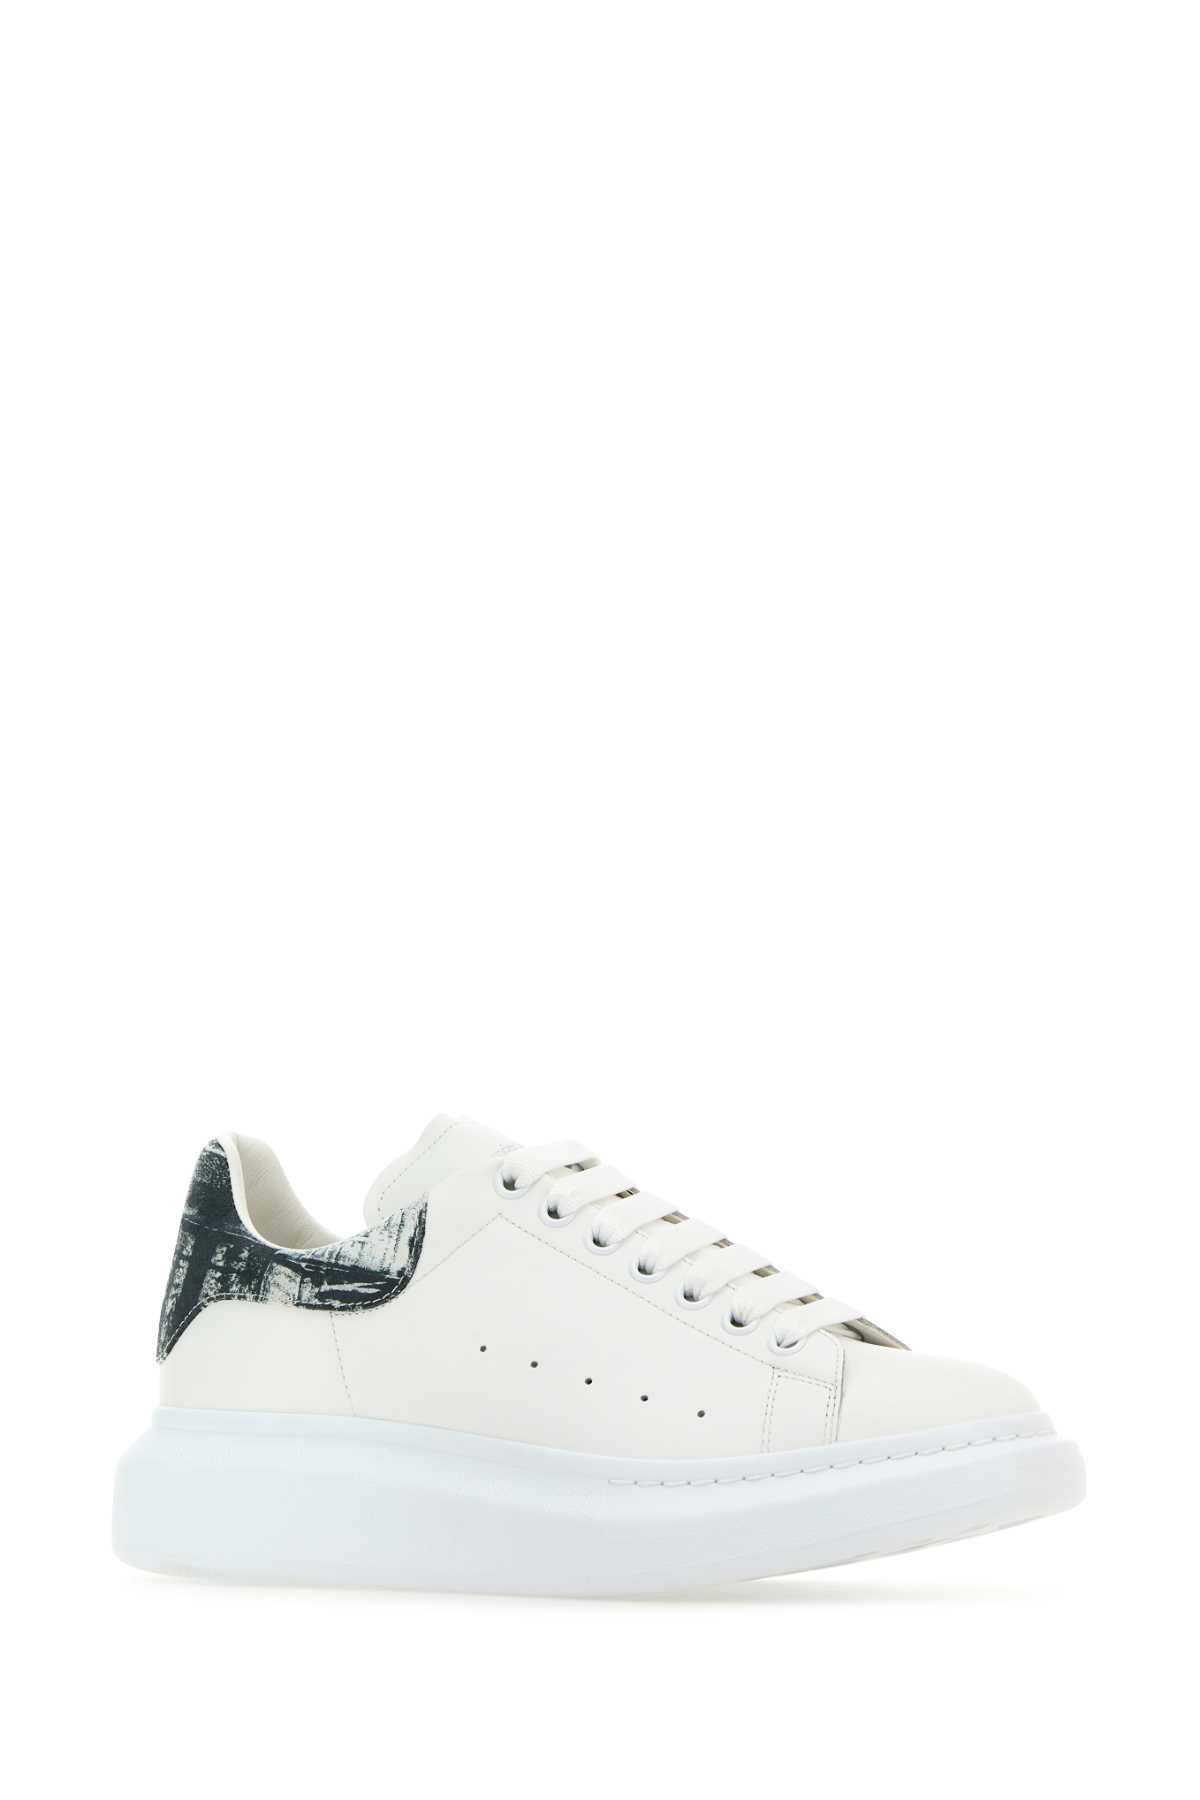 ALEXANDER MCQUEEN WHITE LEATHER SNEAKERS WITH PRINTED FABRIC HEELÂ